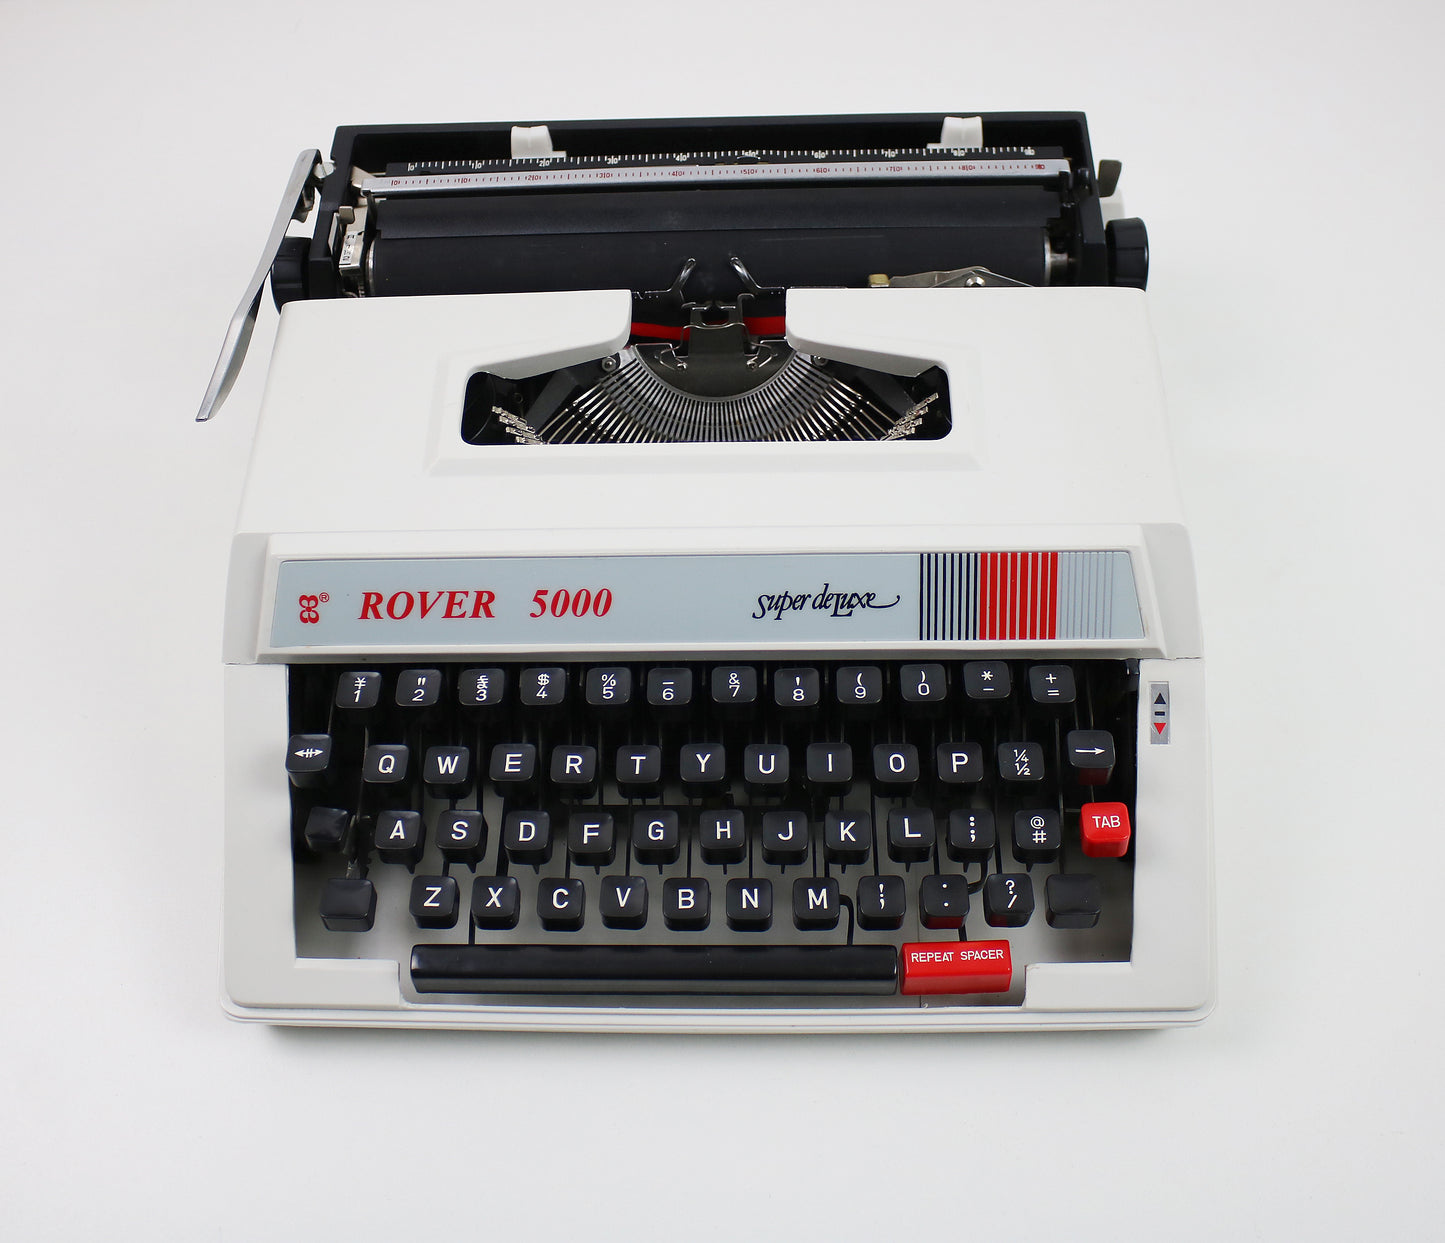 Preloved Rover portable typewriter - white - early 21st Century